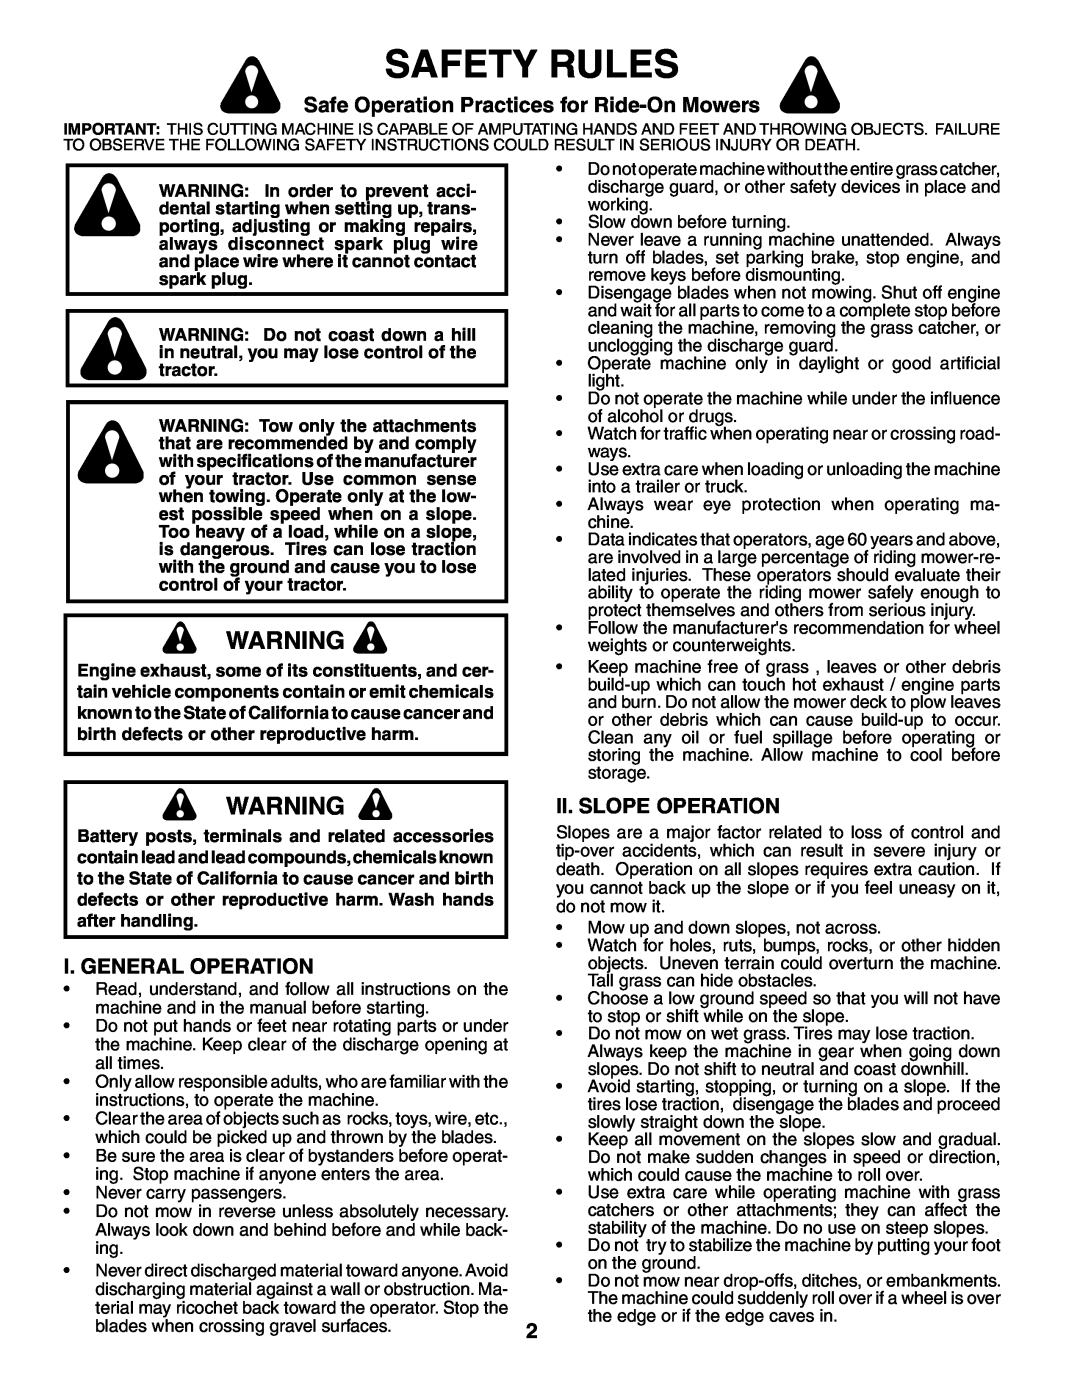 Poulan WE13538LT manual Safety Rules, Safe Operation Practices for Ride-OnMowers, I. General Operation, Ii. Slope Operation 